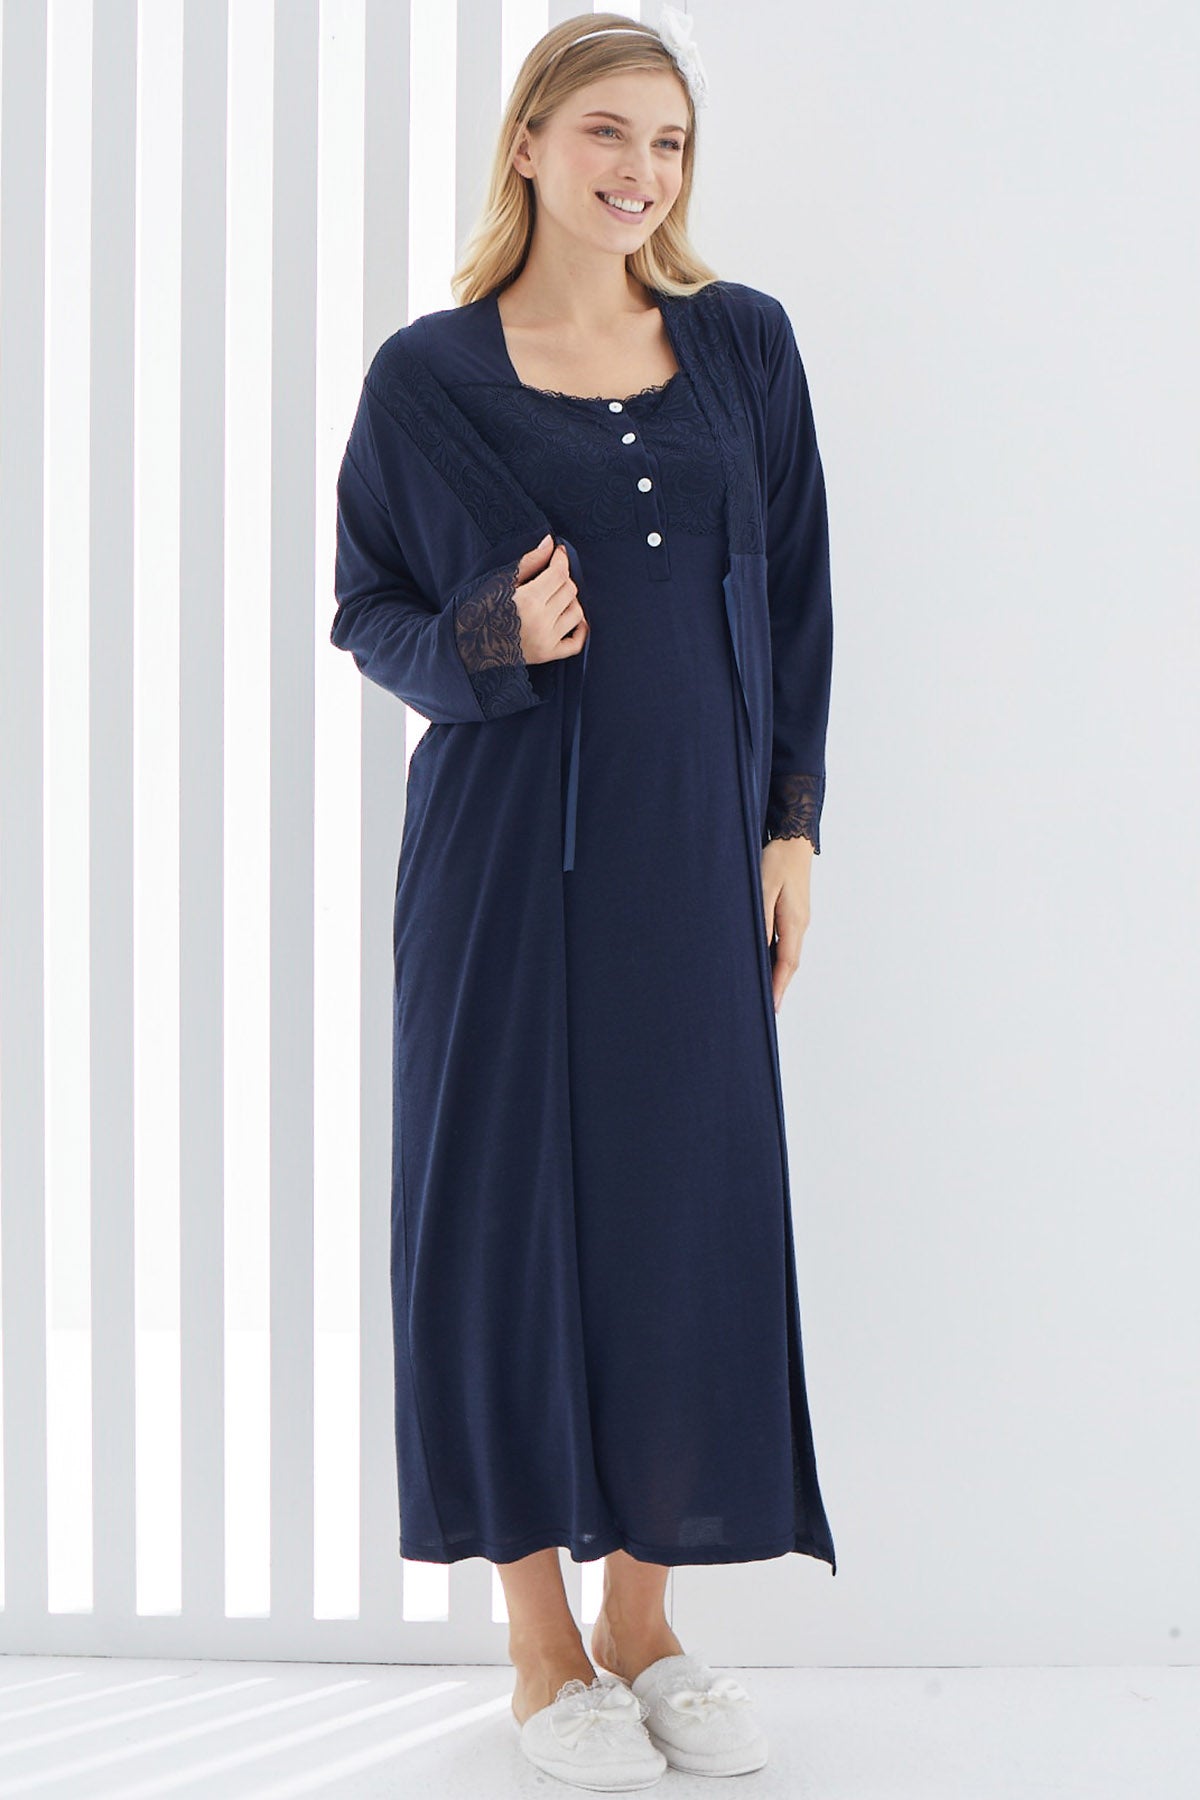 Shopymommy 2267 Maternity & Nursing Nightgown With Lace Sleeve Robe Navy Blue